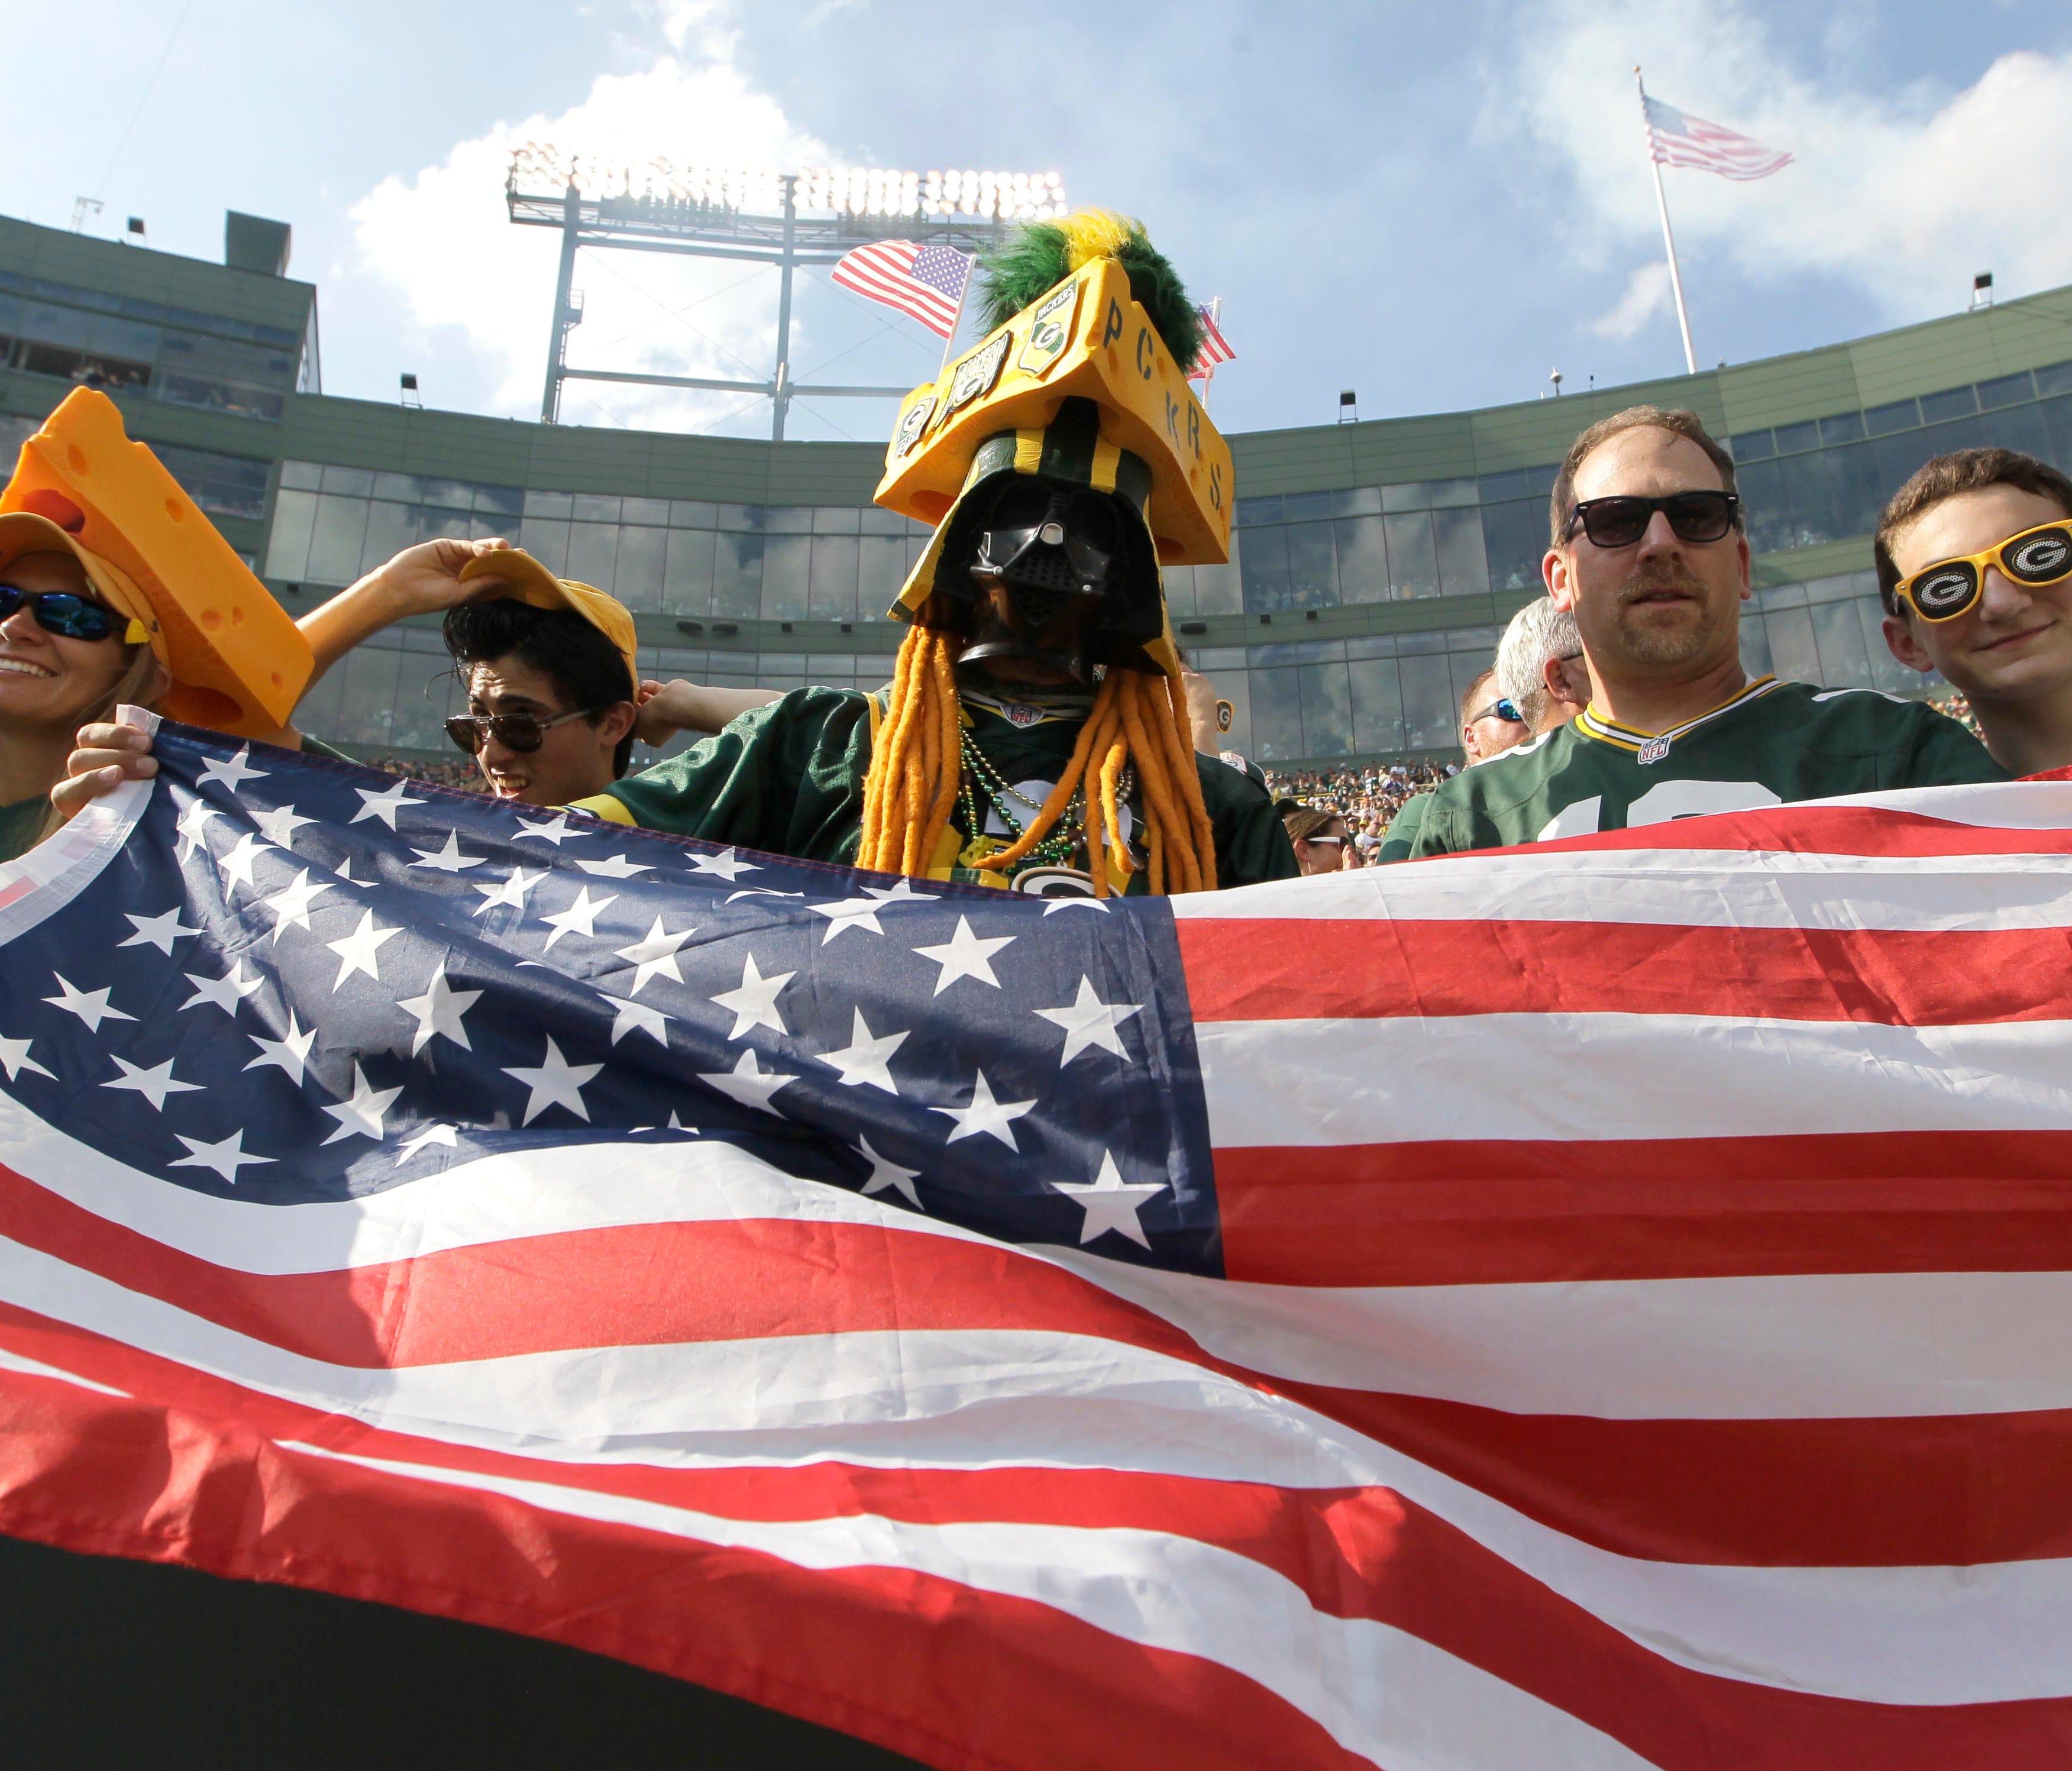 Green Bay Packers fans wave the American flag following the national anthem on Sunday.